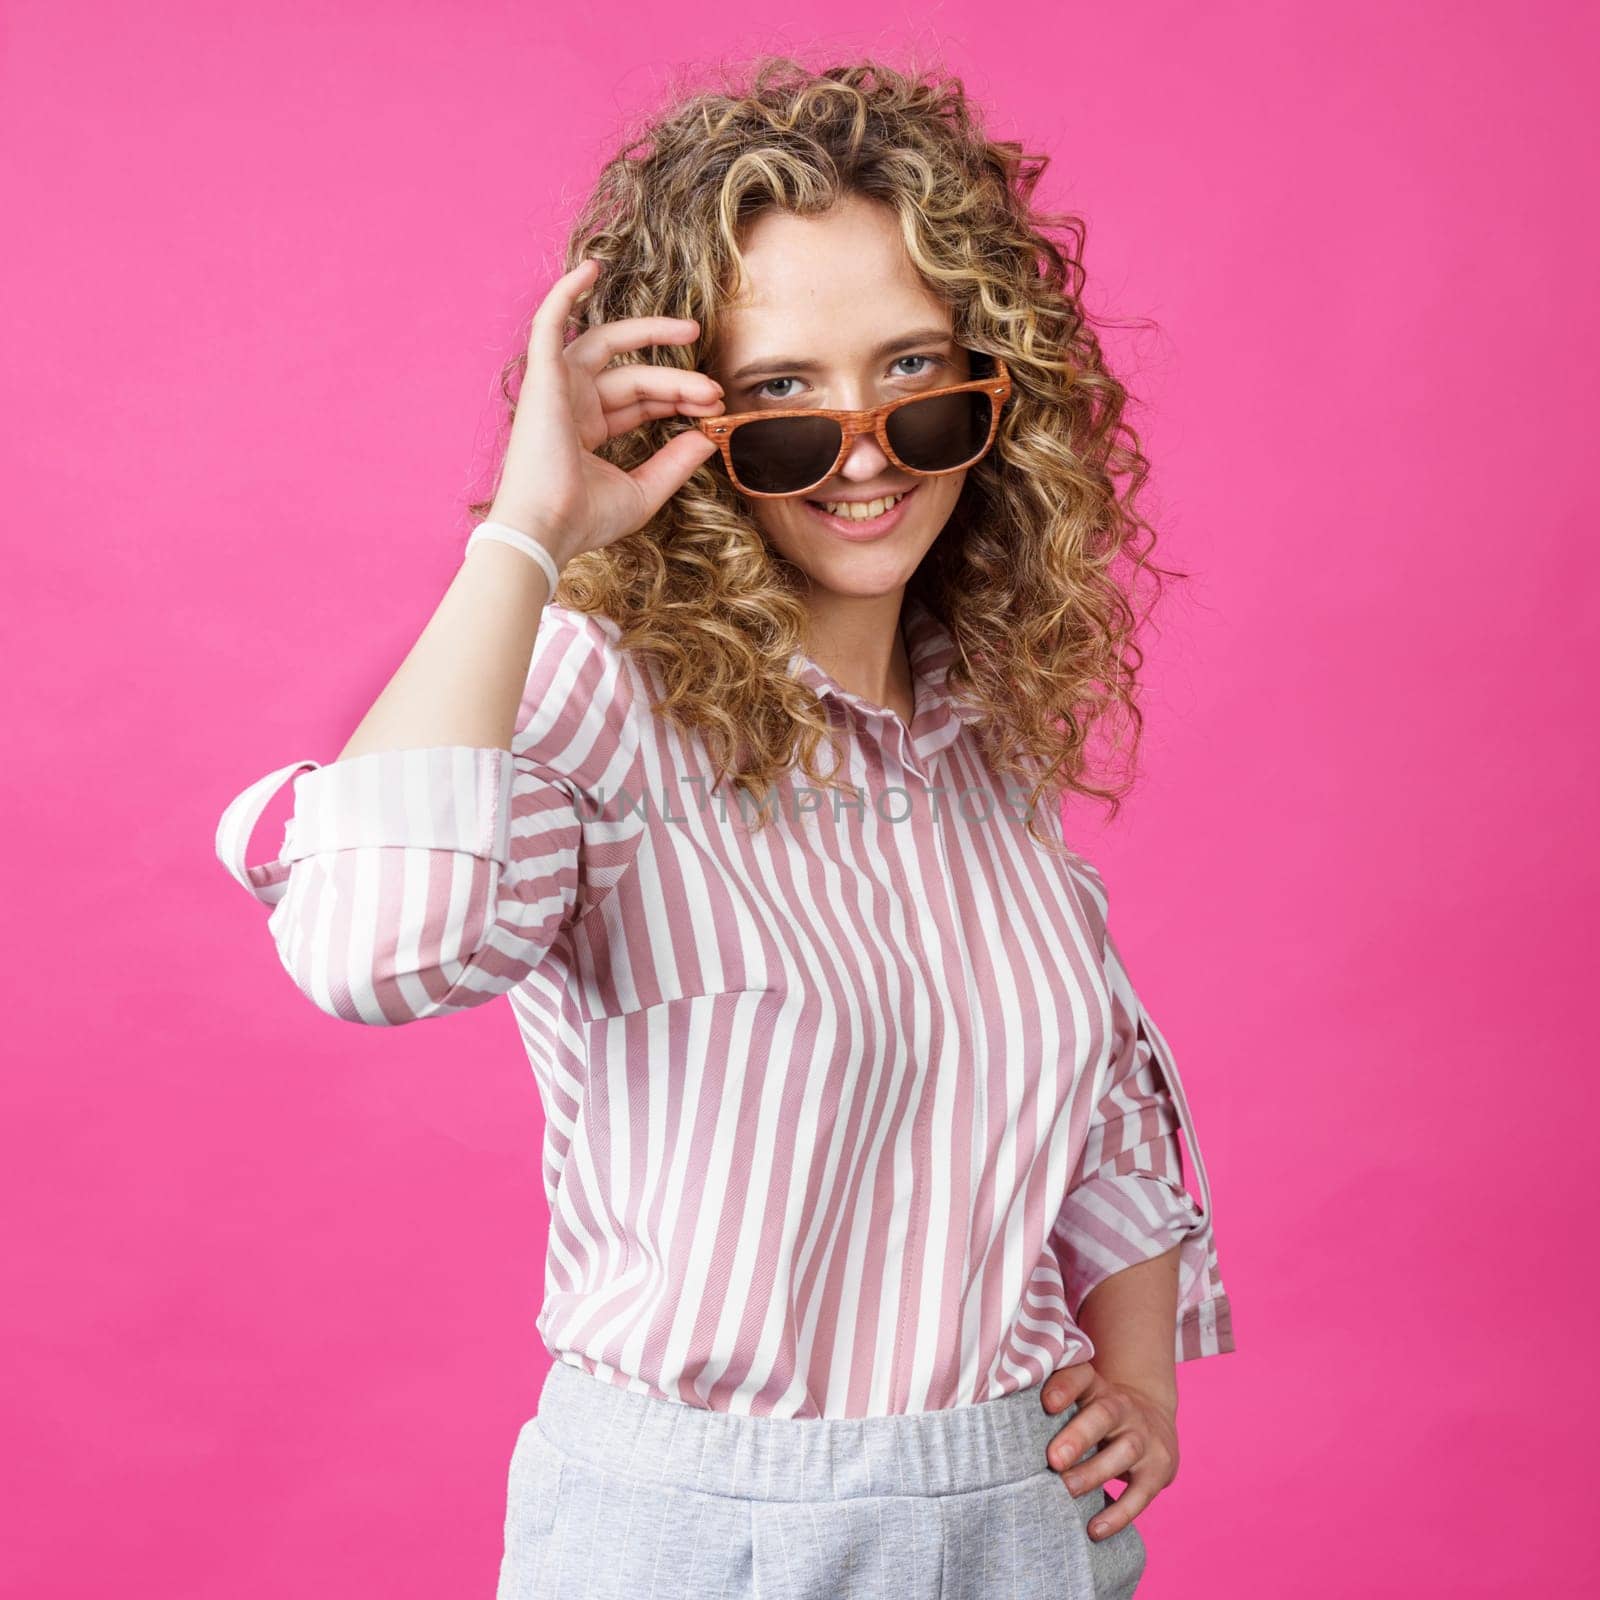 Portrait of a young, beautiful, healthy woman holding glasses and looking at the camera. Isolated on pink background.